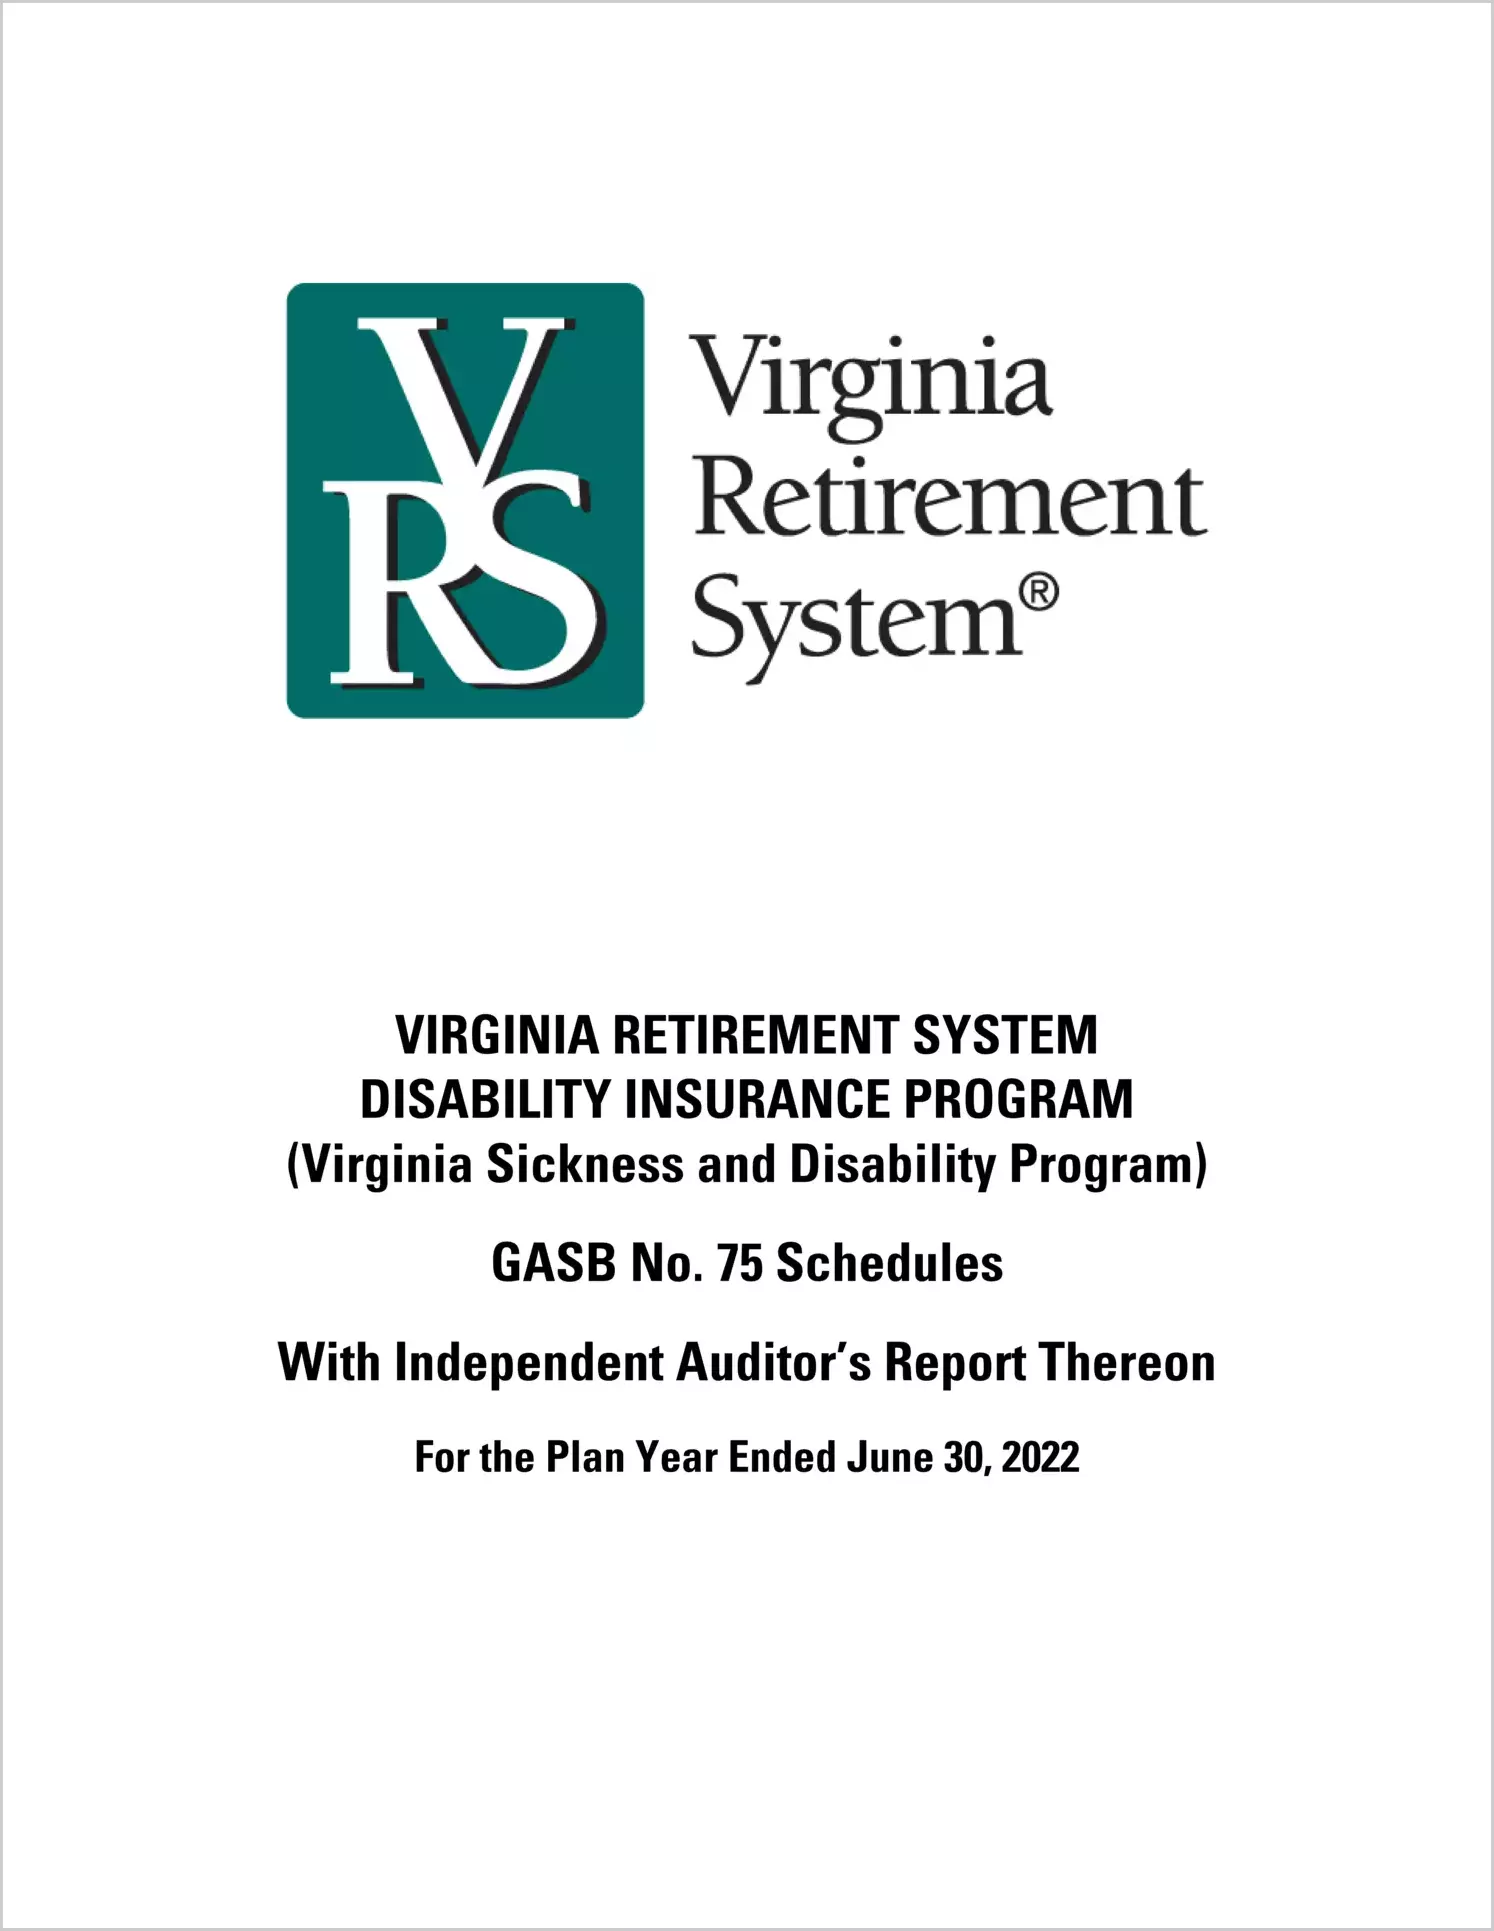 GASB 75 Virginia Retirement System Disability Insurance Programs for the year ended June 30, 2022